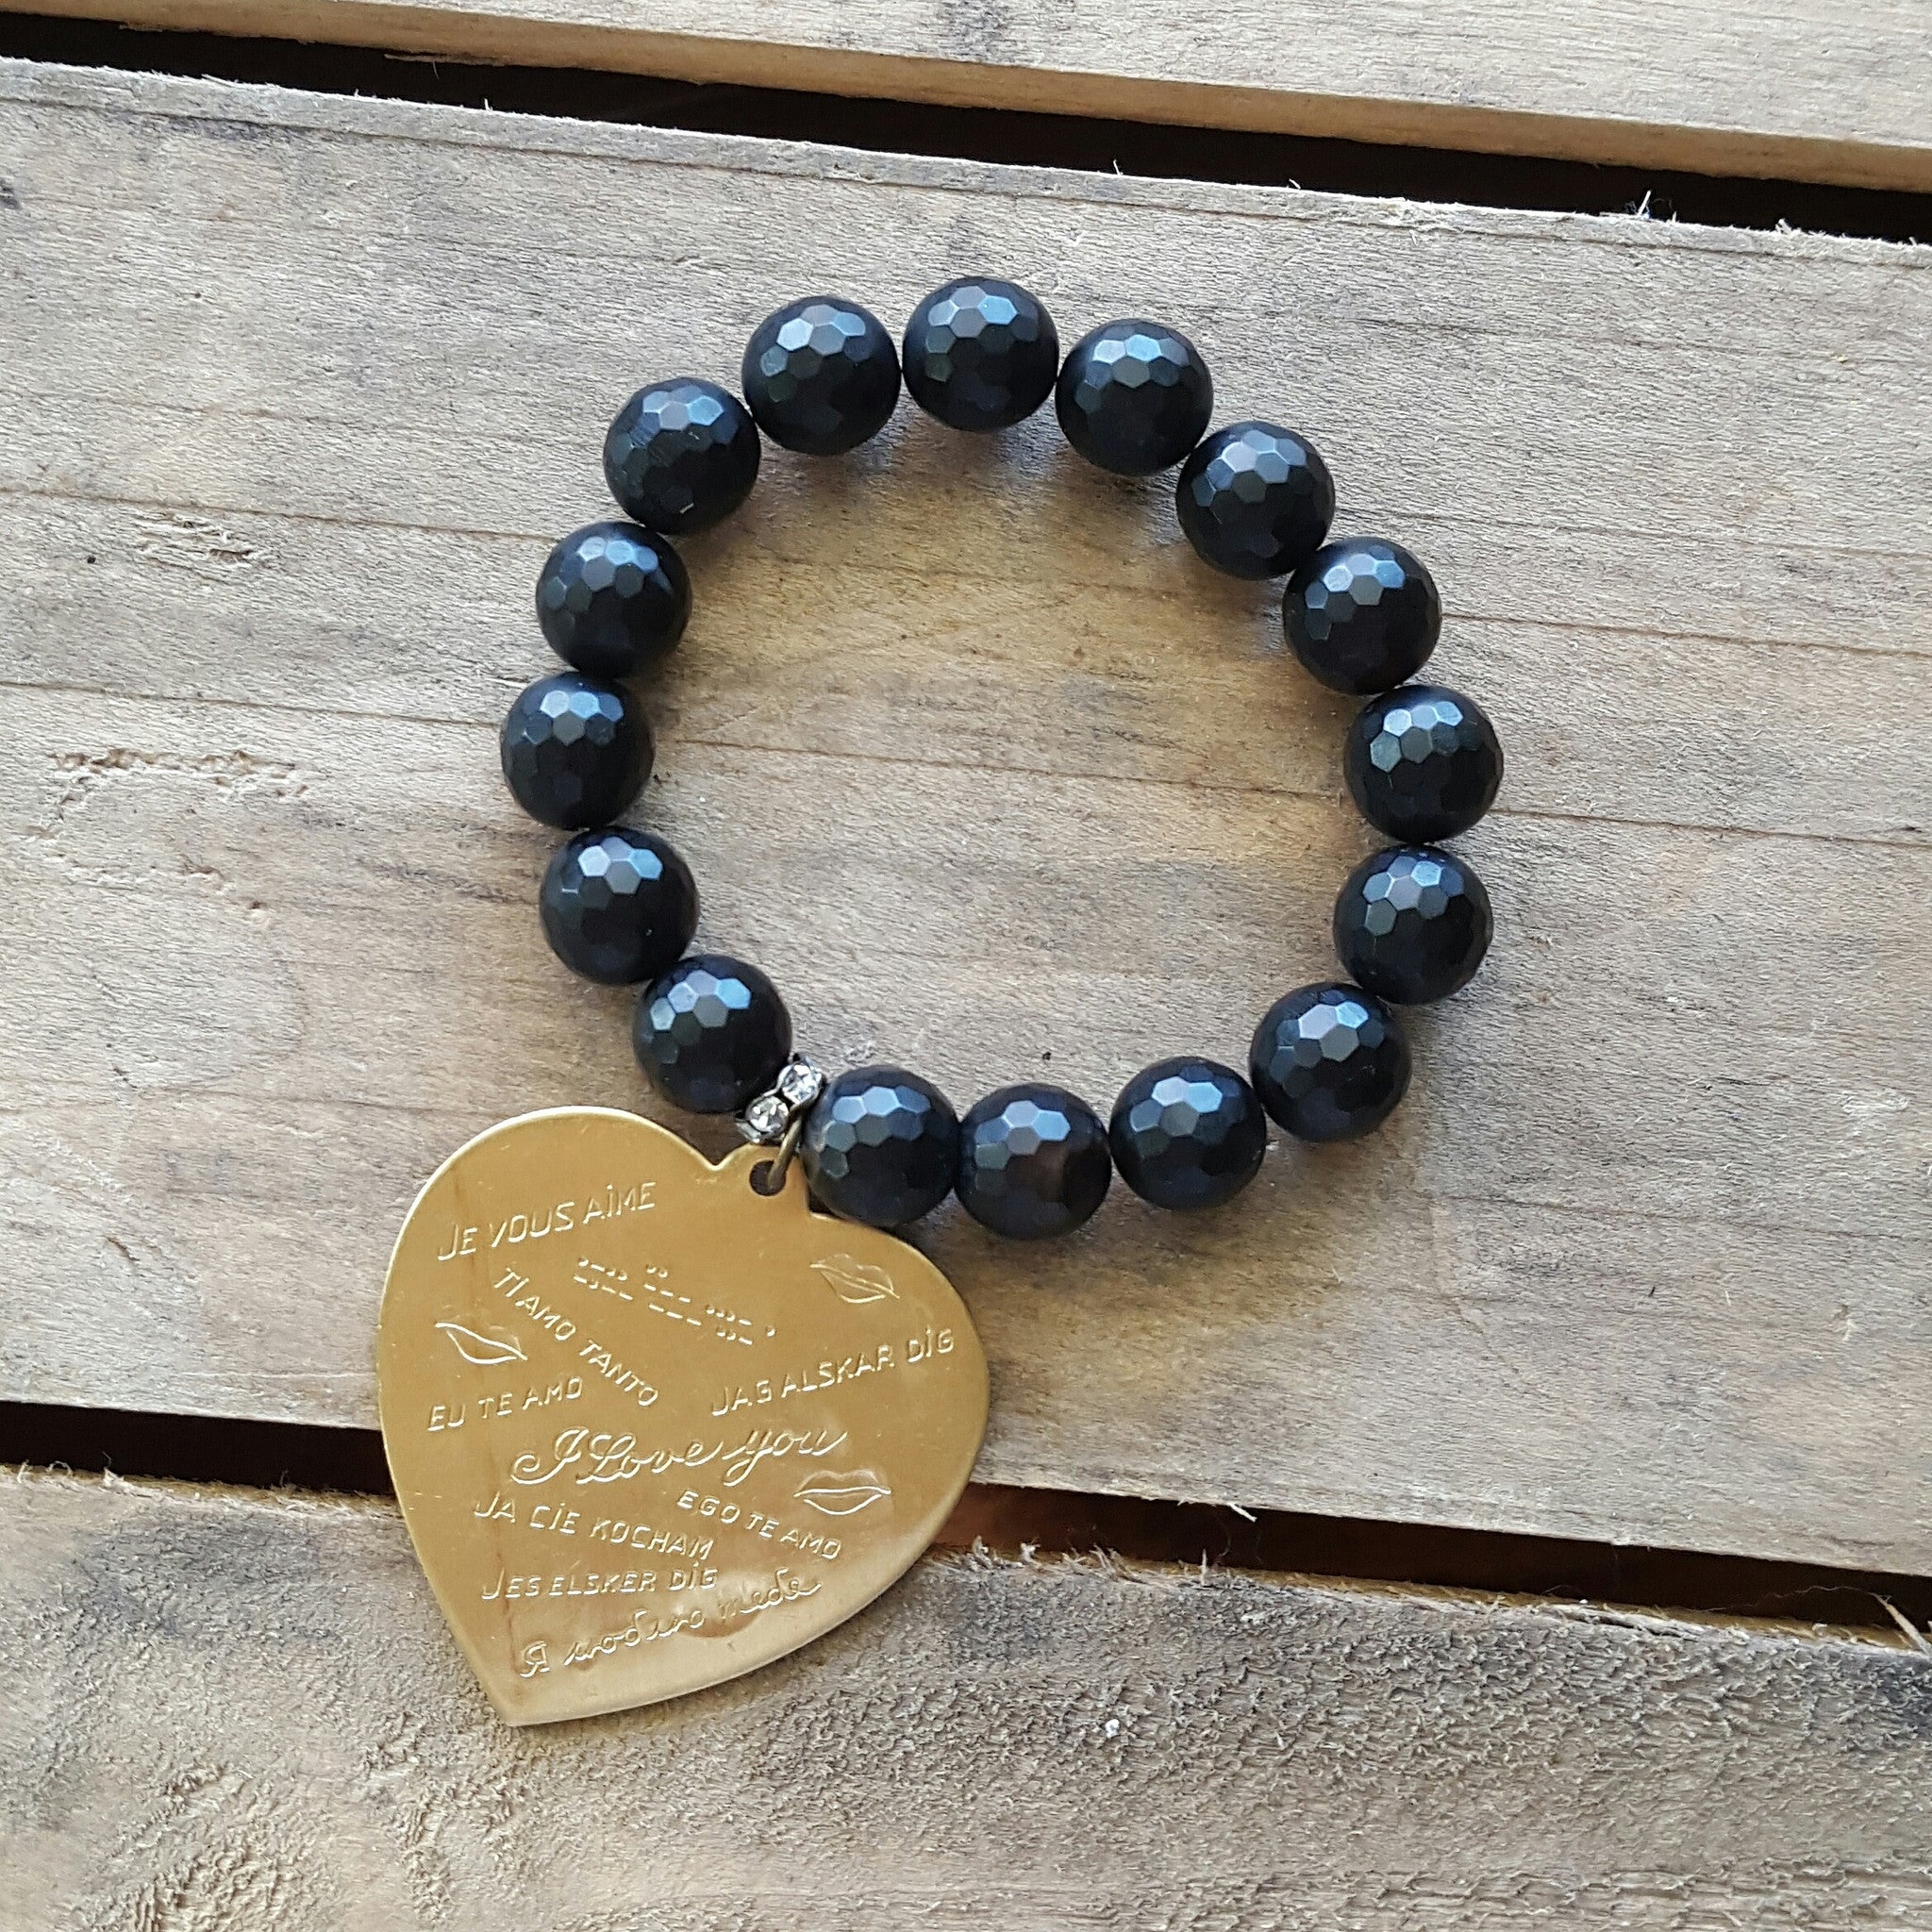 protection bracelet by Marinella jewelry 10mm matte black agate 44mm brass stamped I love you heart charm